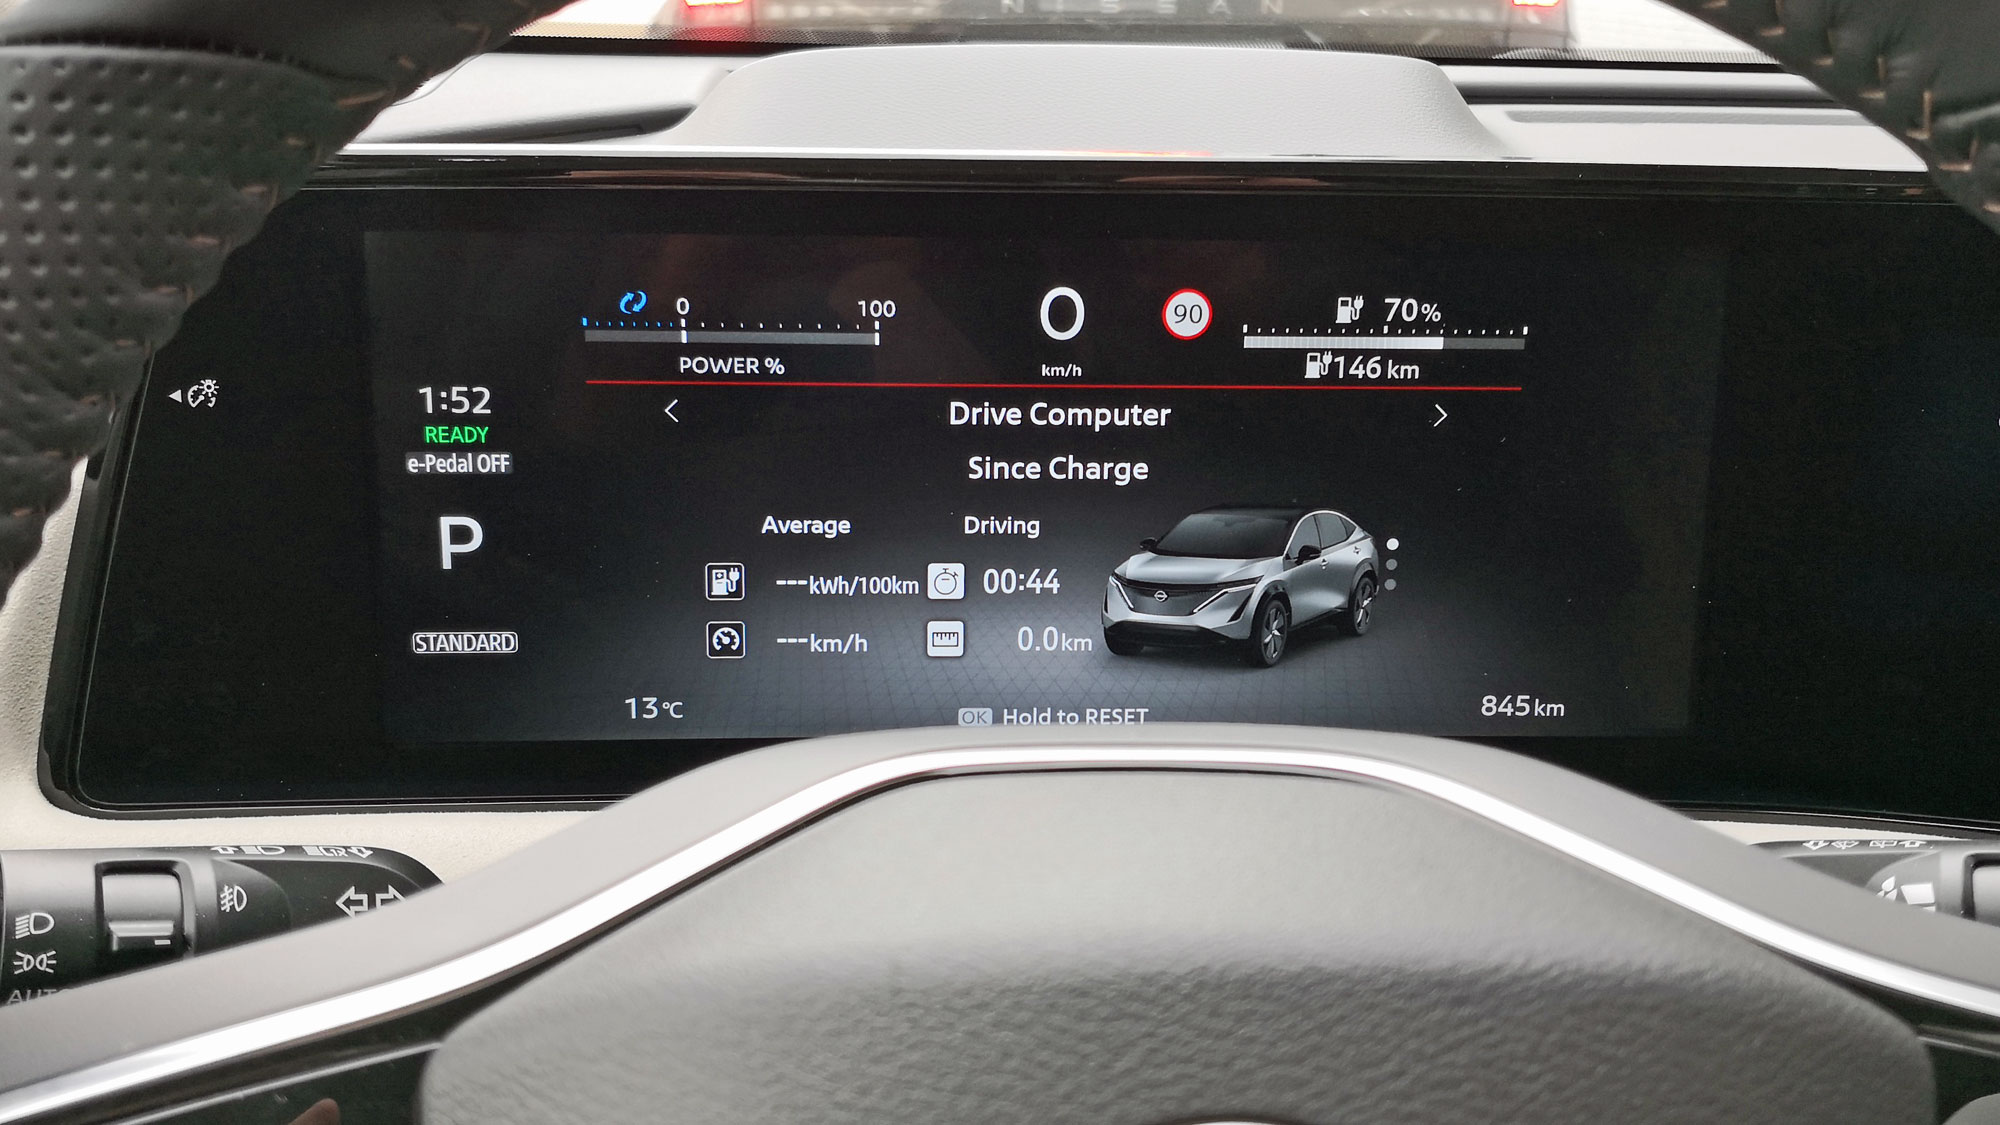 Close-up of the cluster display in the Ariya EV